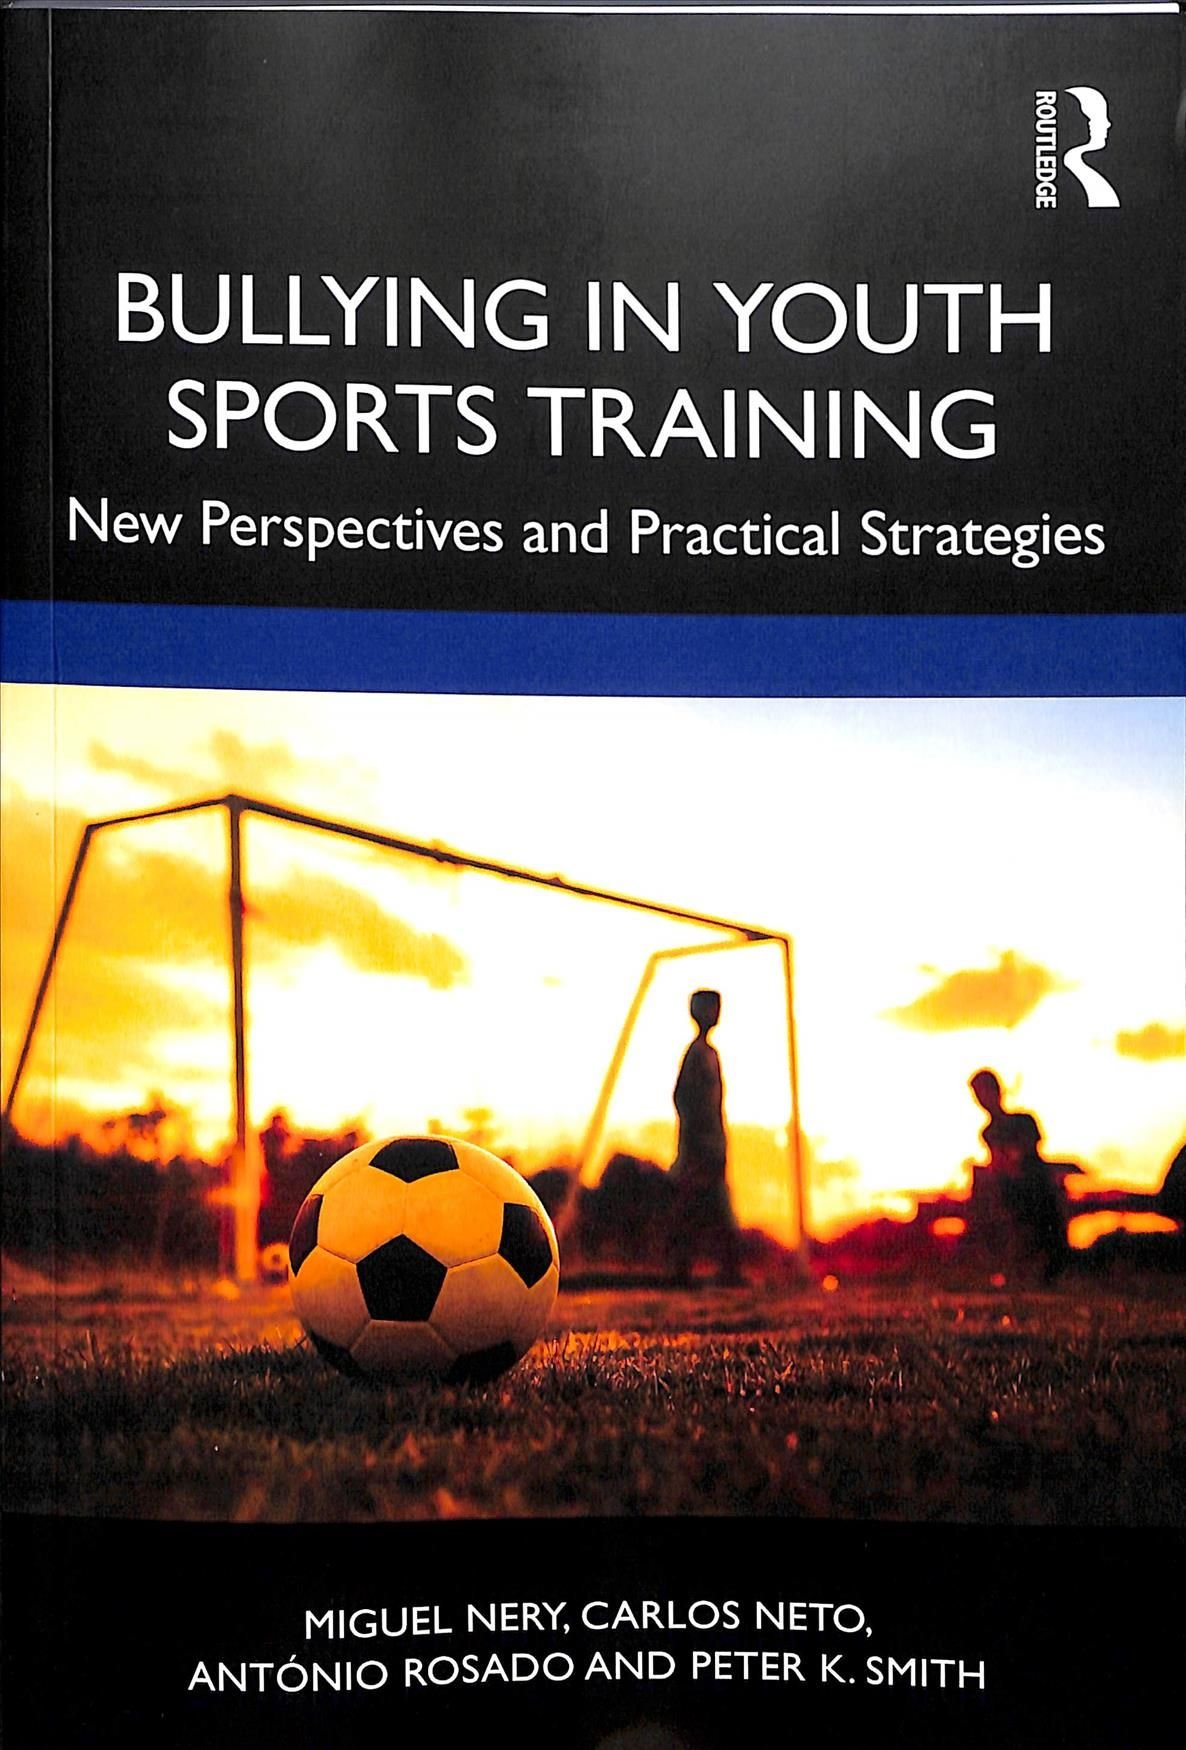 Bullying in Youth Sports Training